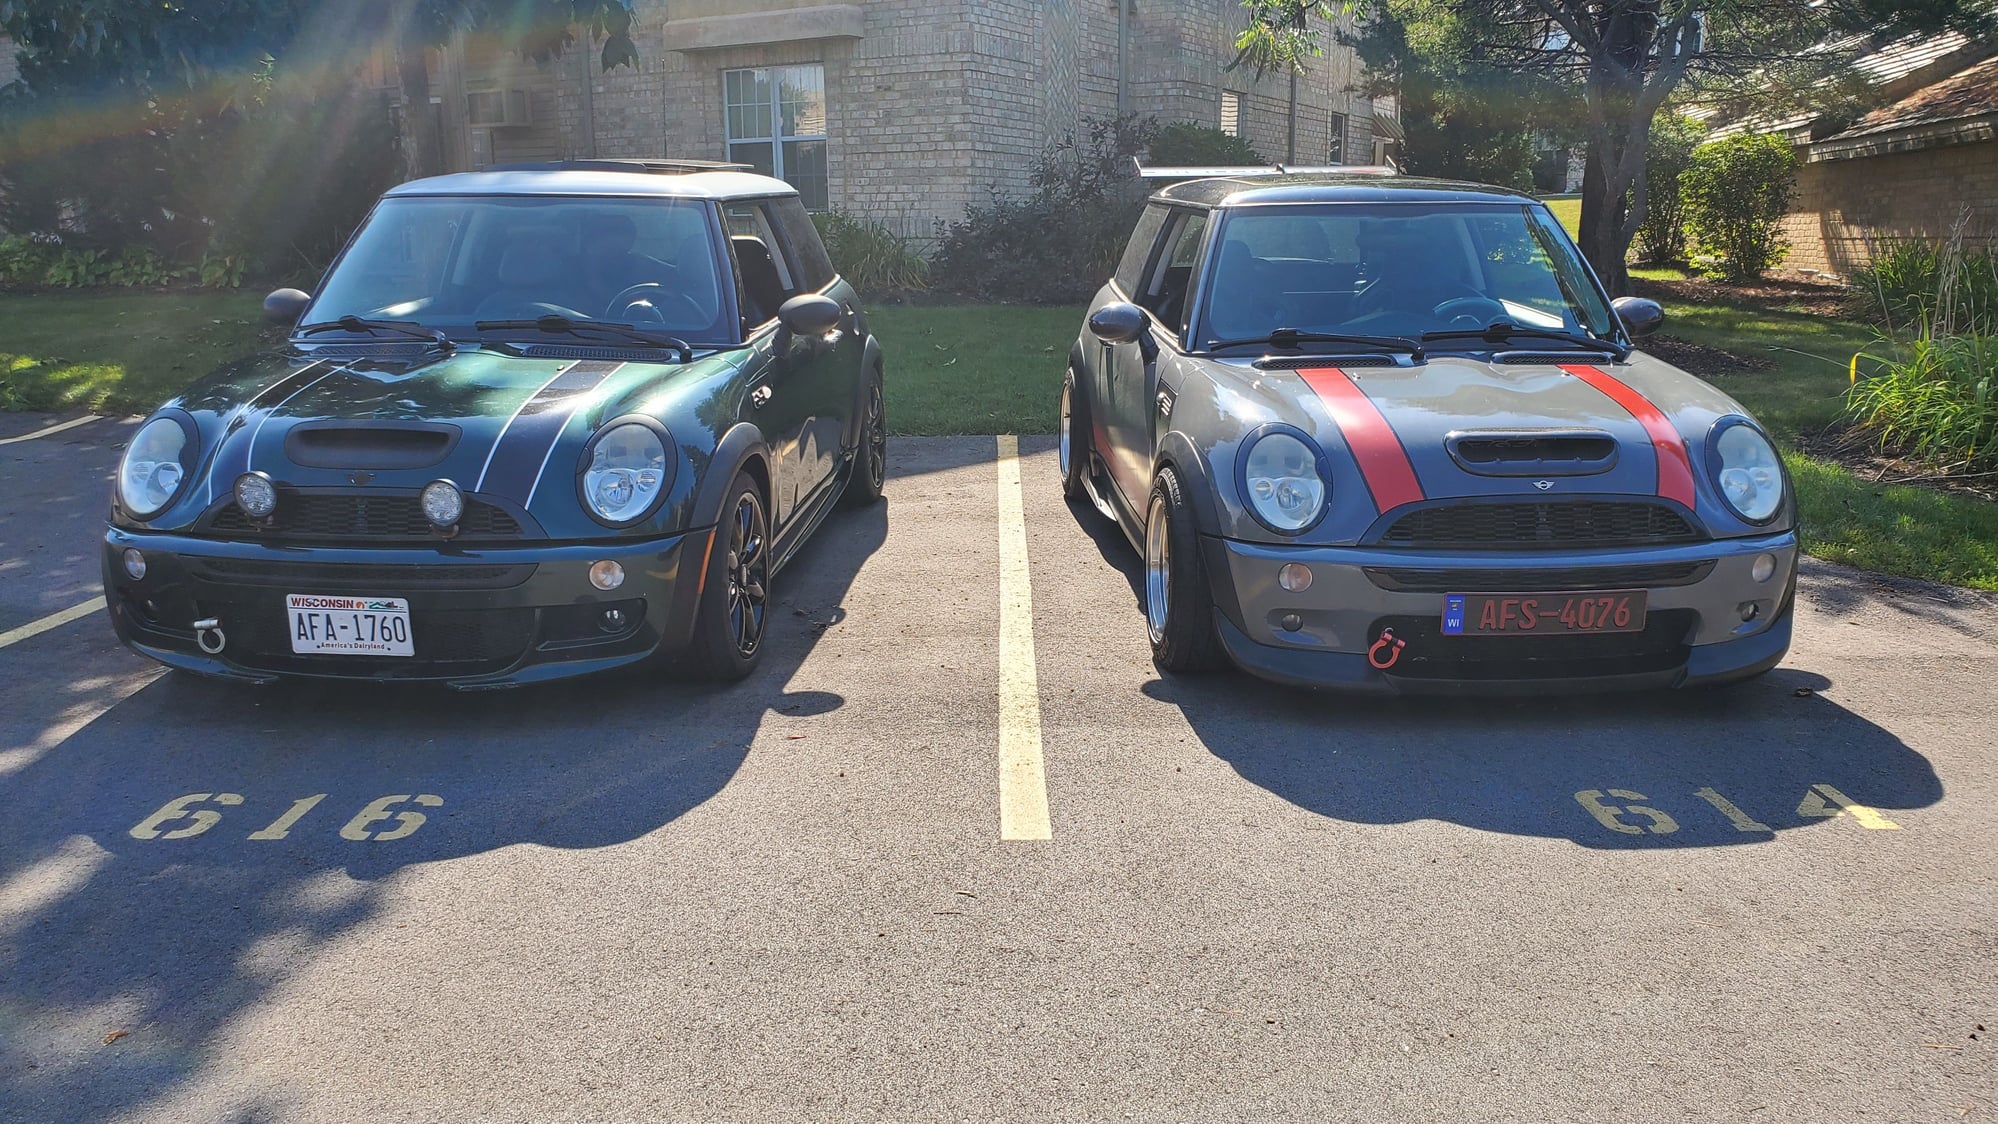 R50/R53 Project  bringing notorious BRG back  - North American